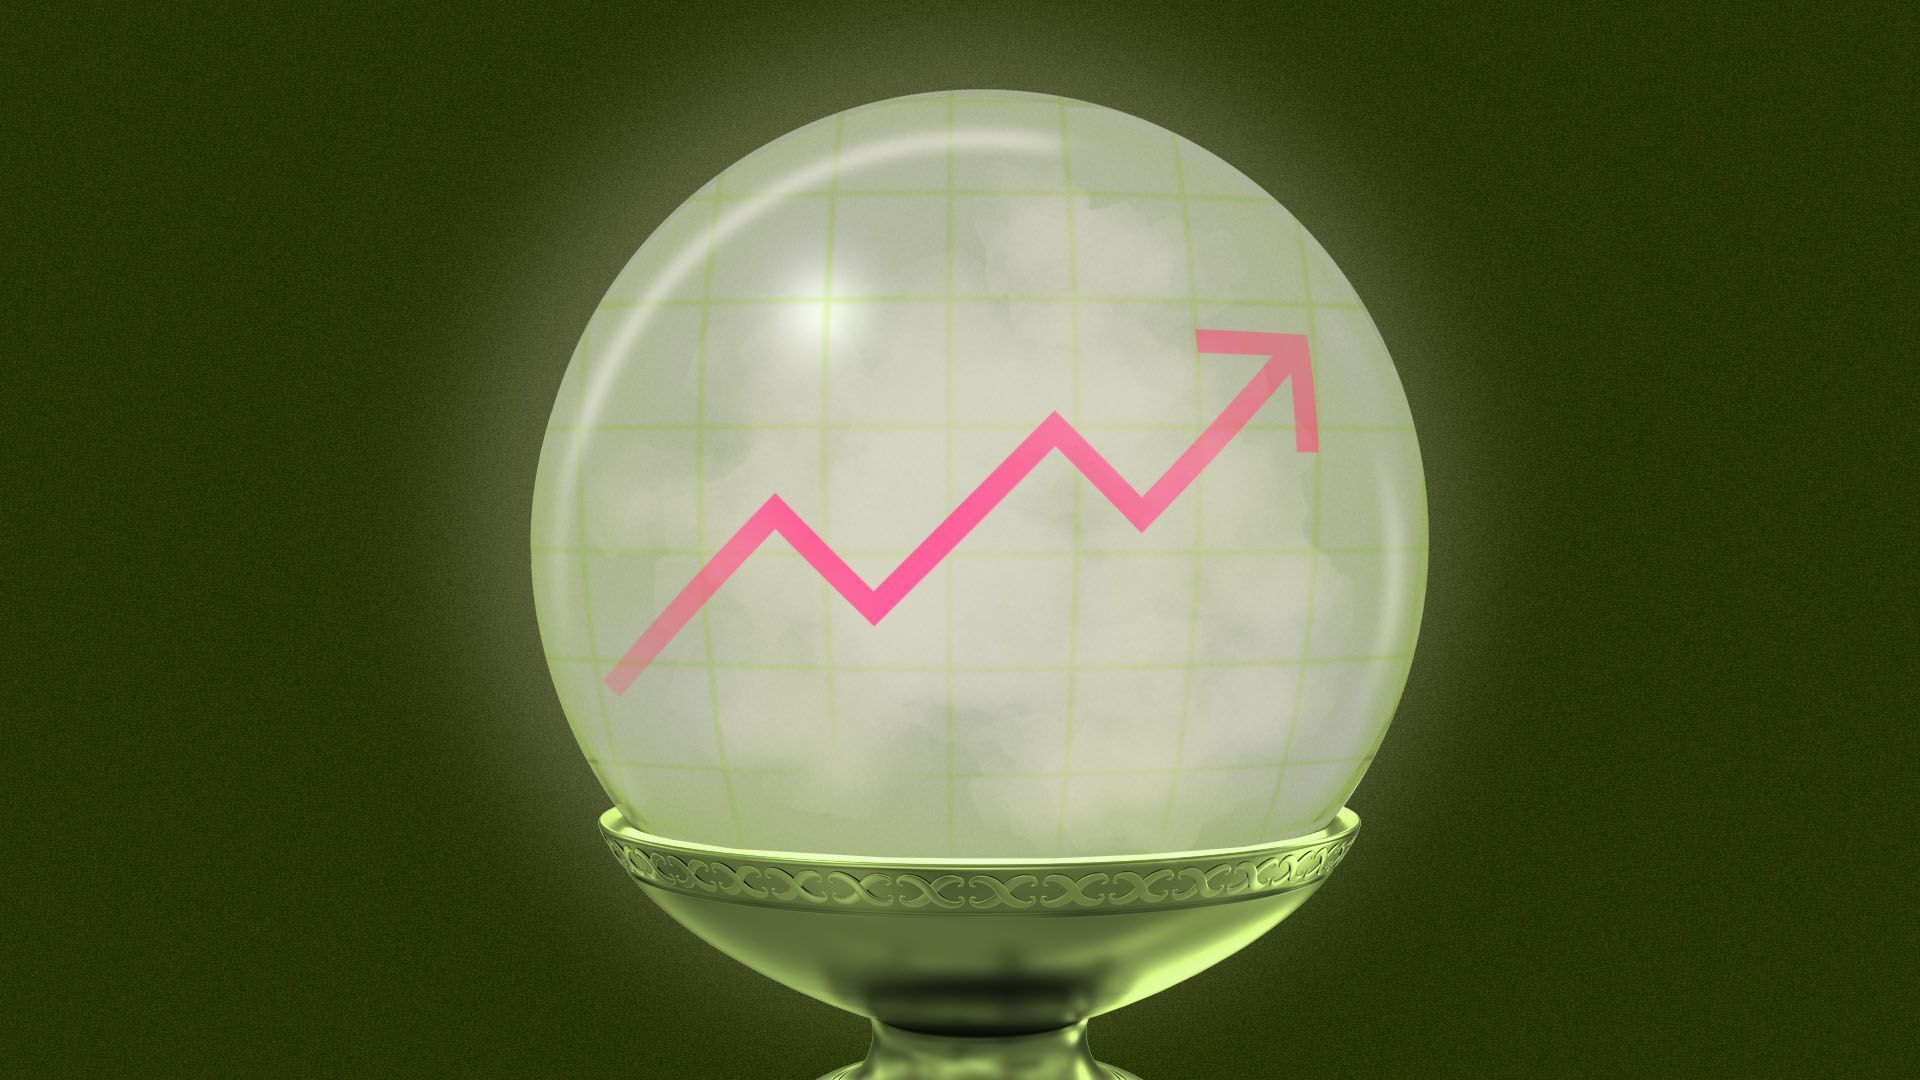 Illustration of a crystal ball showing a line chart.